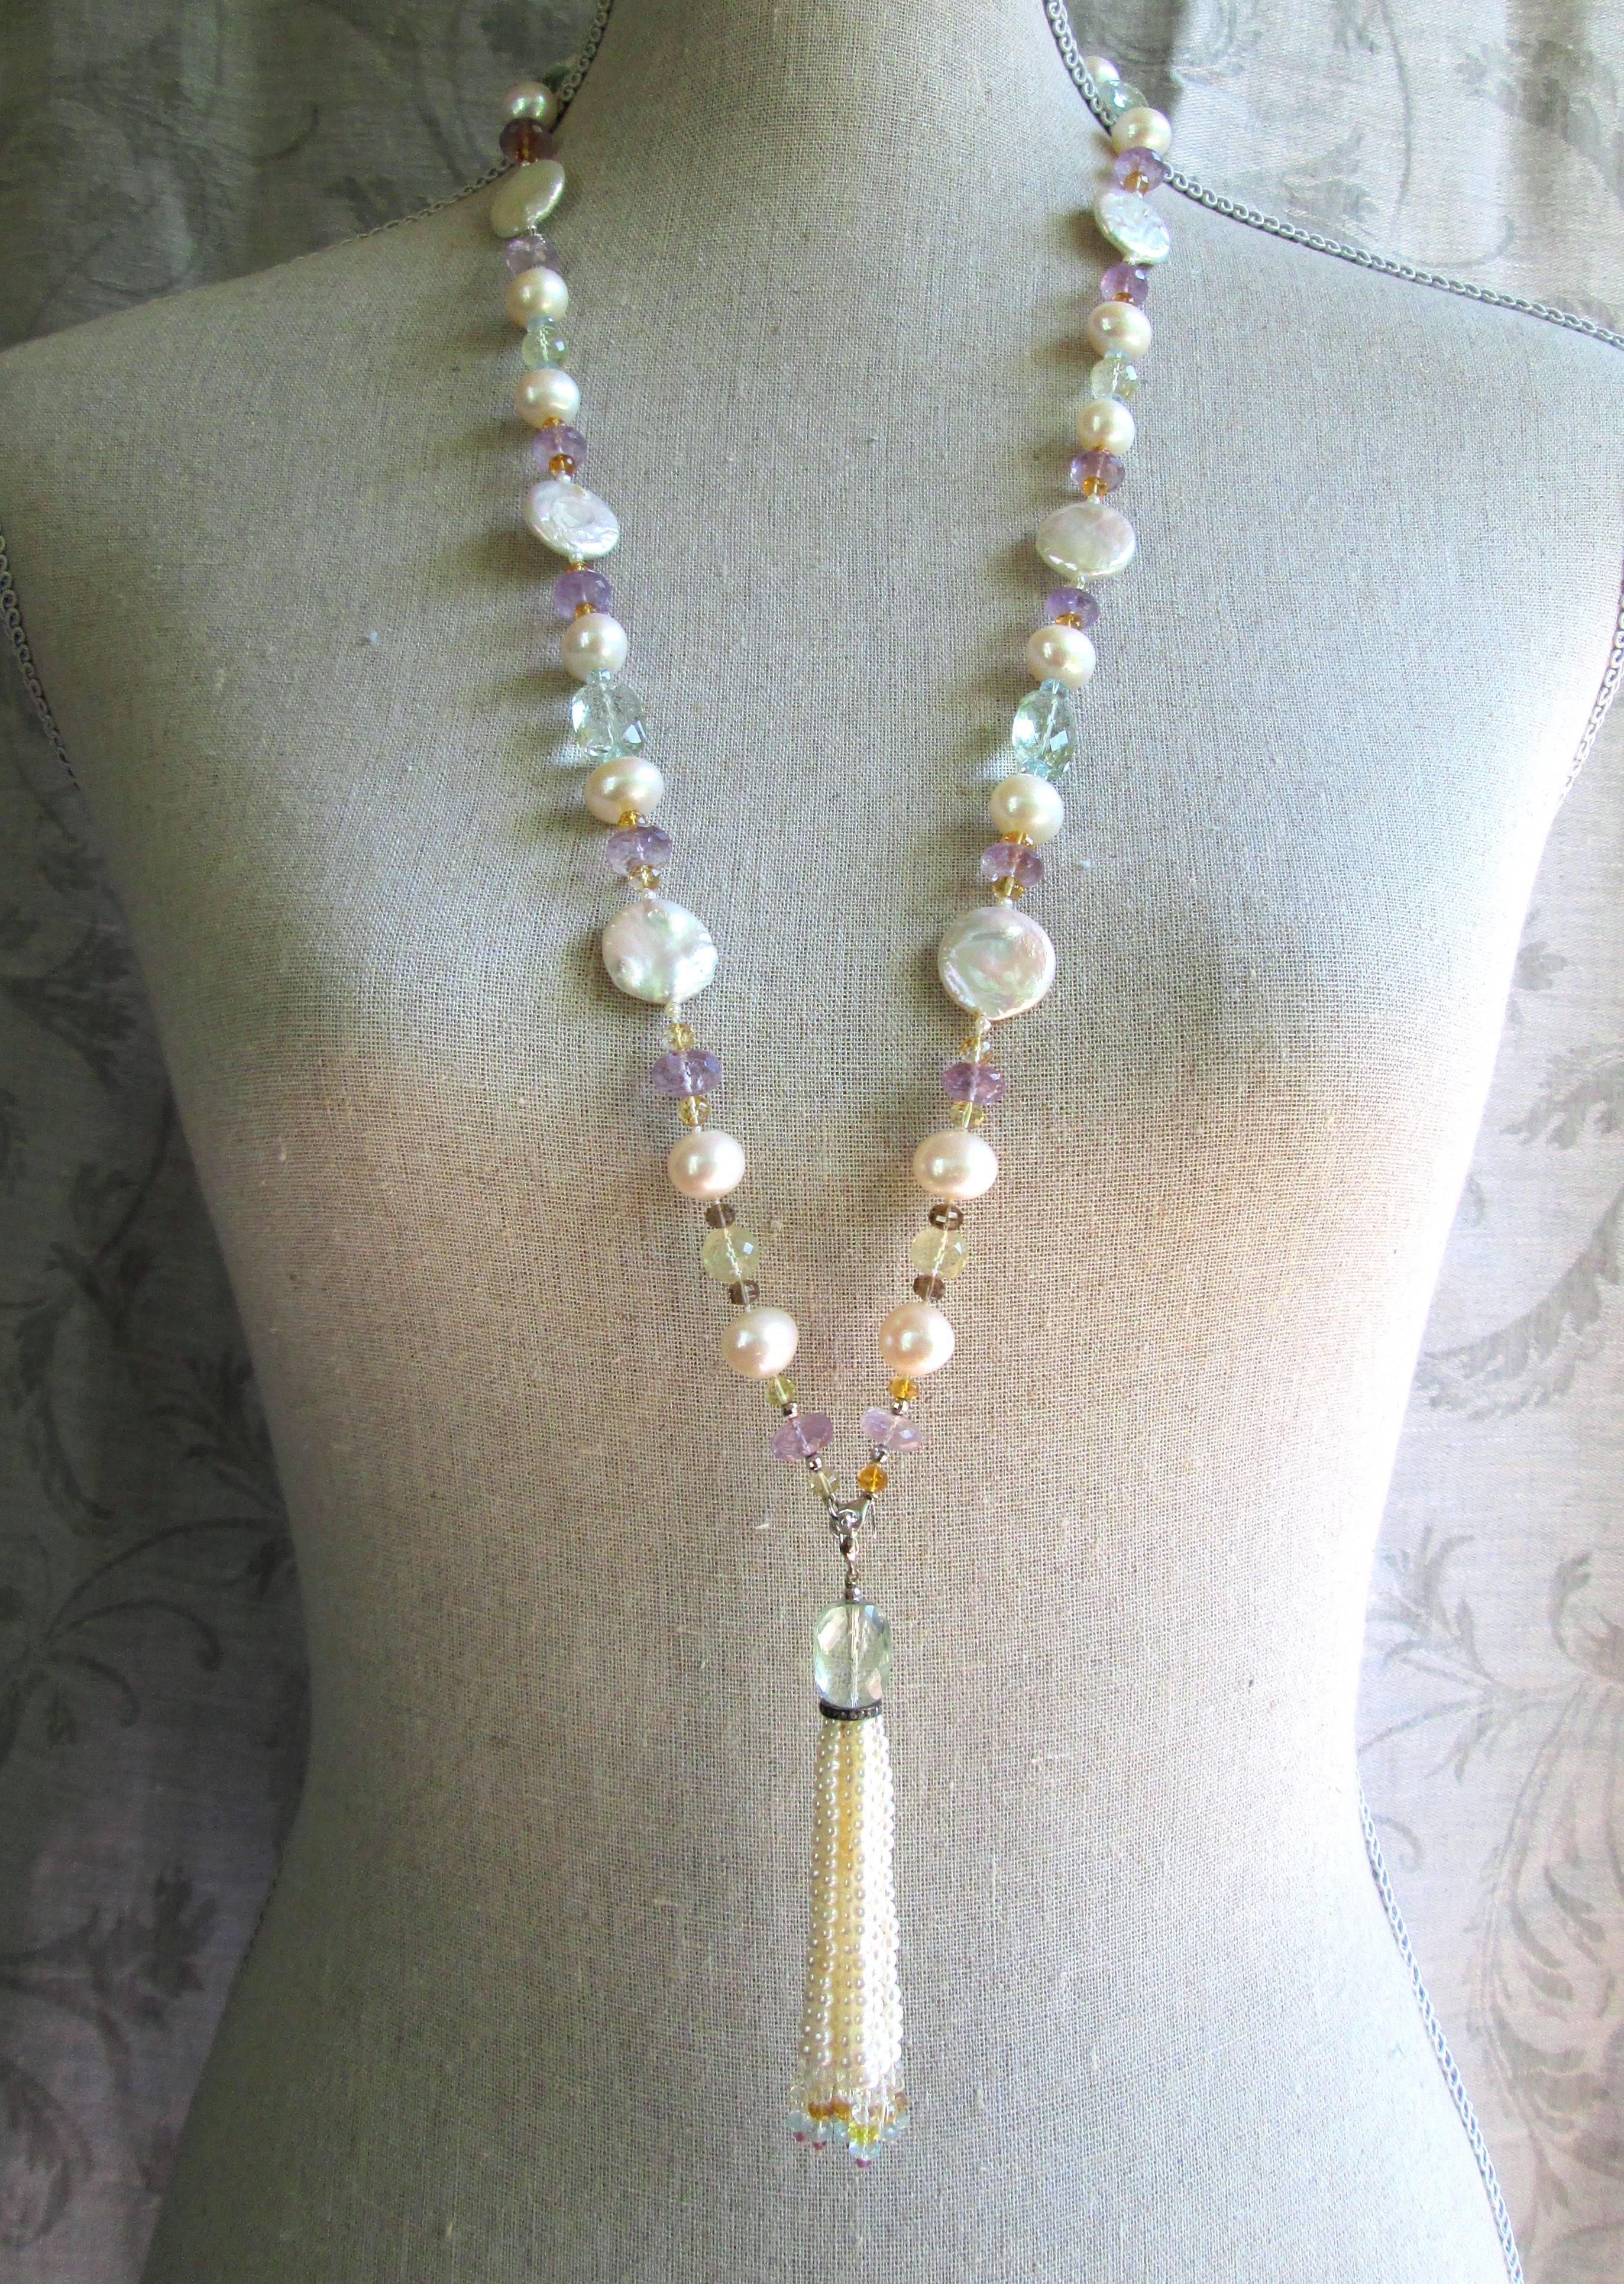 Large Baroque and flat-coin pearls are paired with Amethyst, Citrine, Topaz, Aquamarine, Green Garnet, and Fluorite beads to create a gorgeous shimmering piece. The semiprecious stones highlight the luster and iridescence of the pearls, unifying the